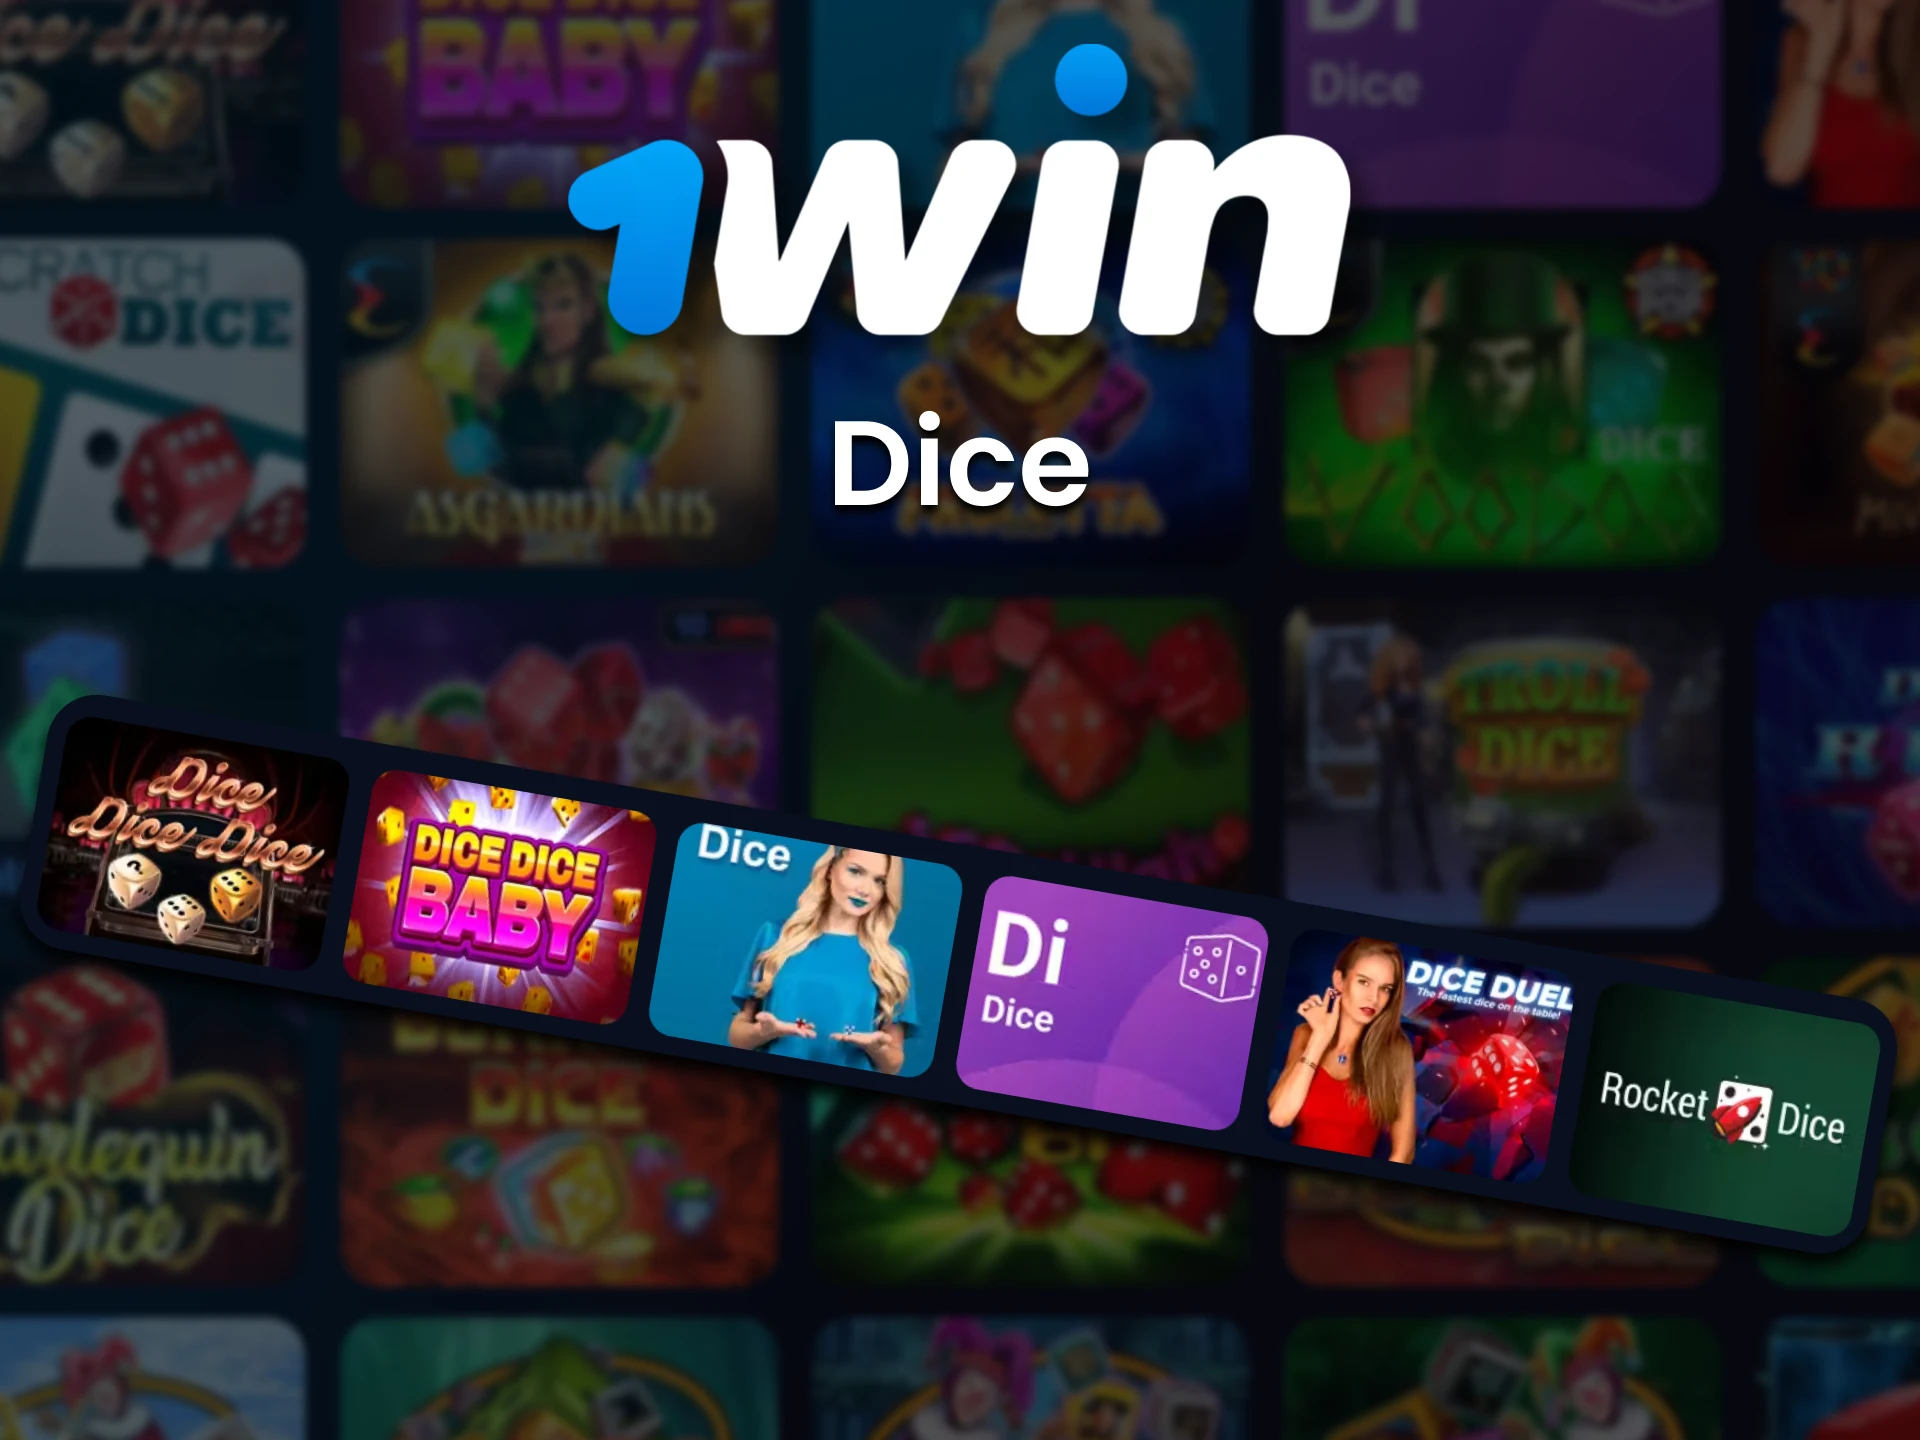 For casino games at 1win choose Dice.